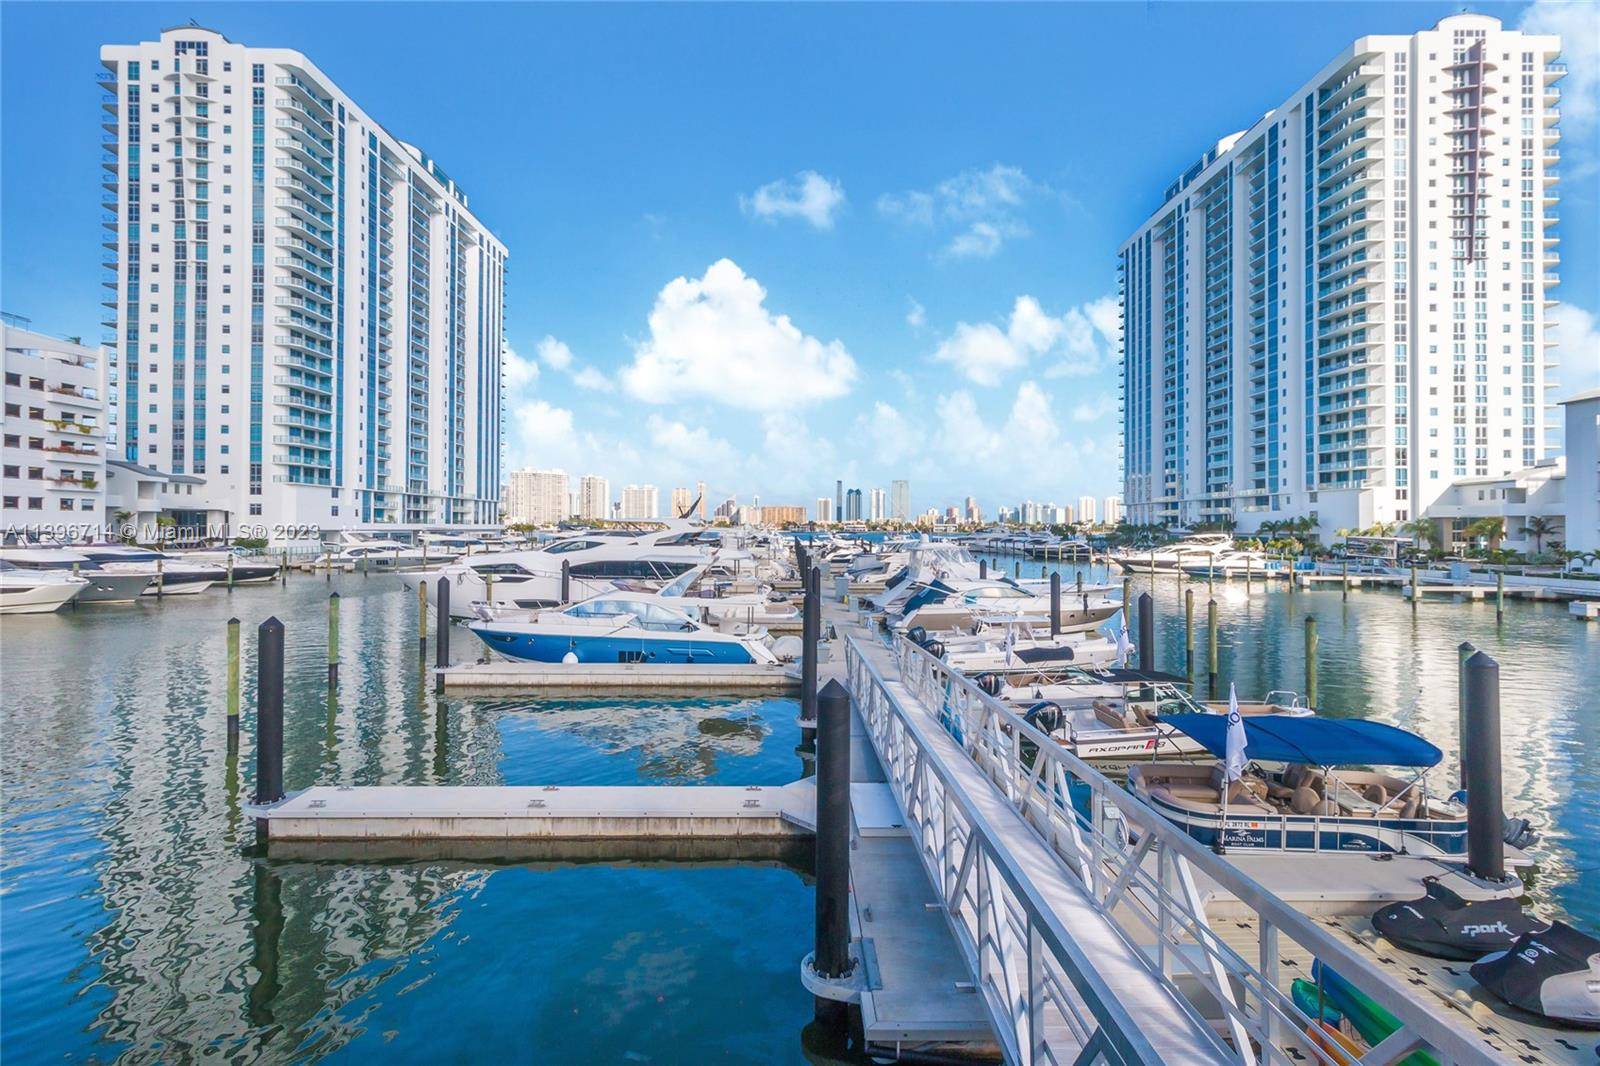 As a premier marina in Northern Miami, the Marina Palms Marina offers an ideal location and first class marina facilities.